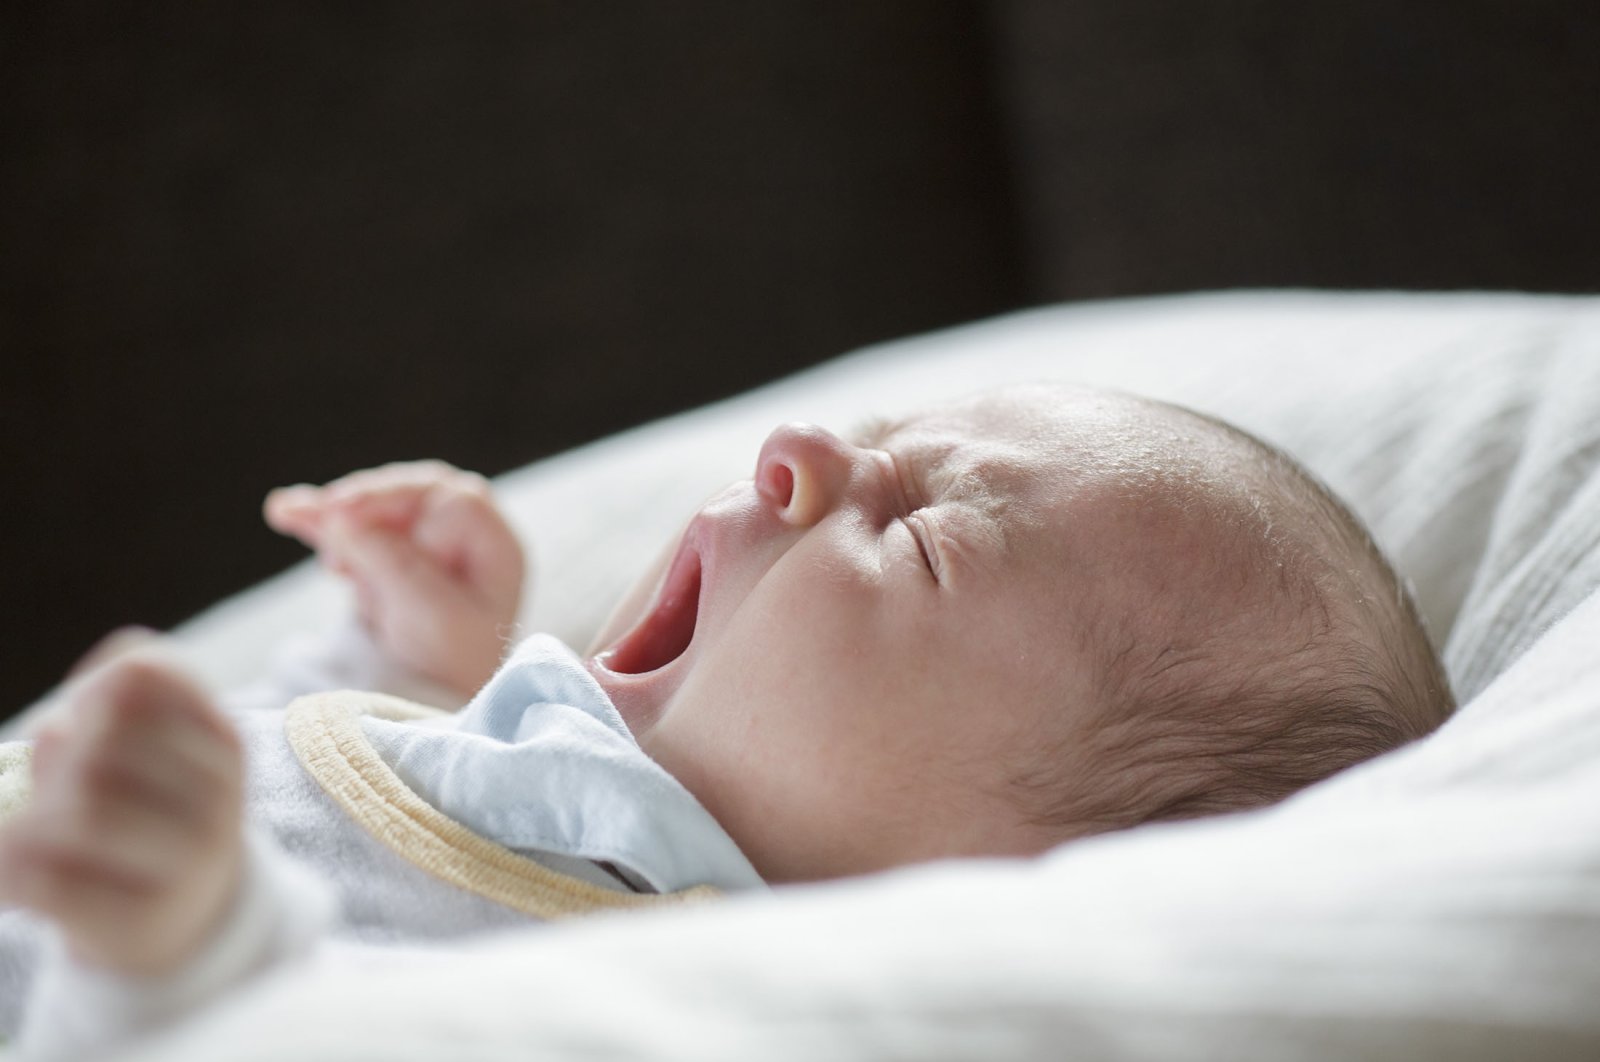 A 5-week old baby yawns on a pillow on April 19, in Buecheloh, Germany. (Photothek via Getty Images)